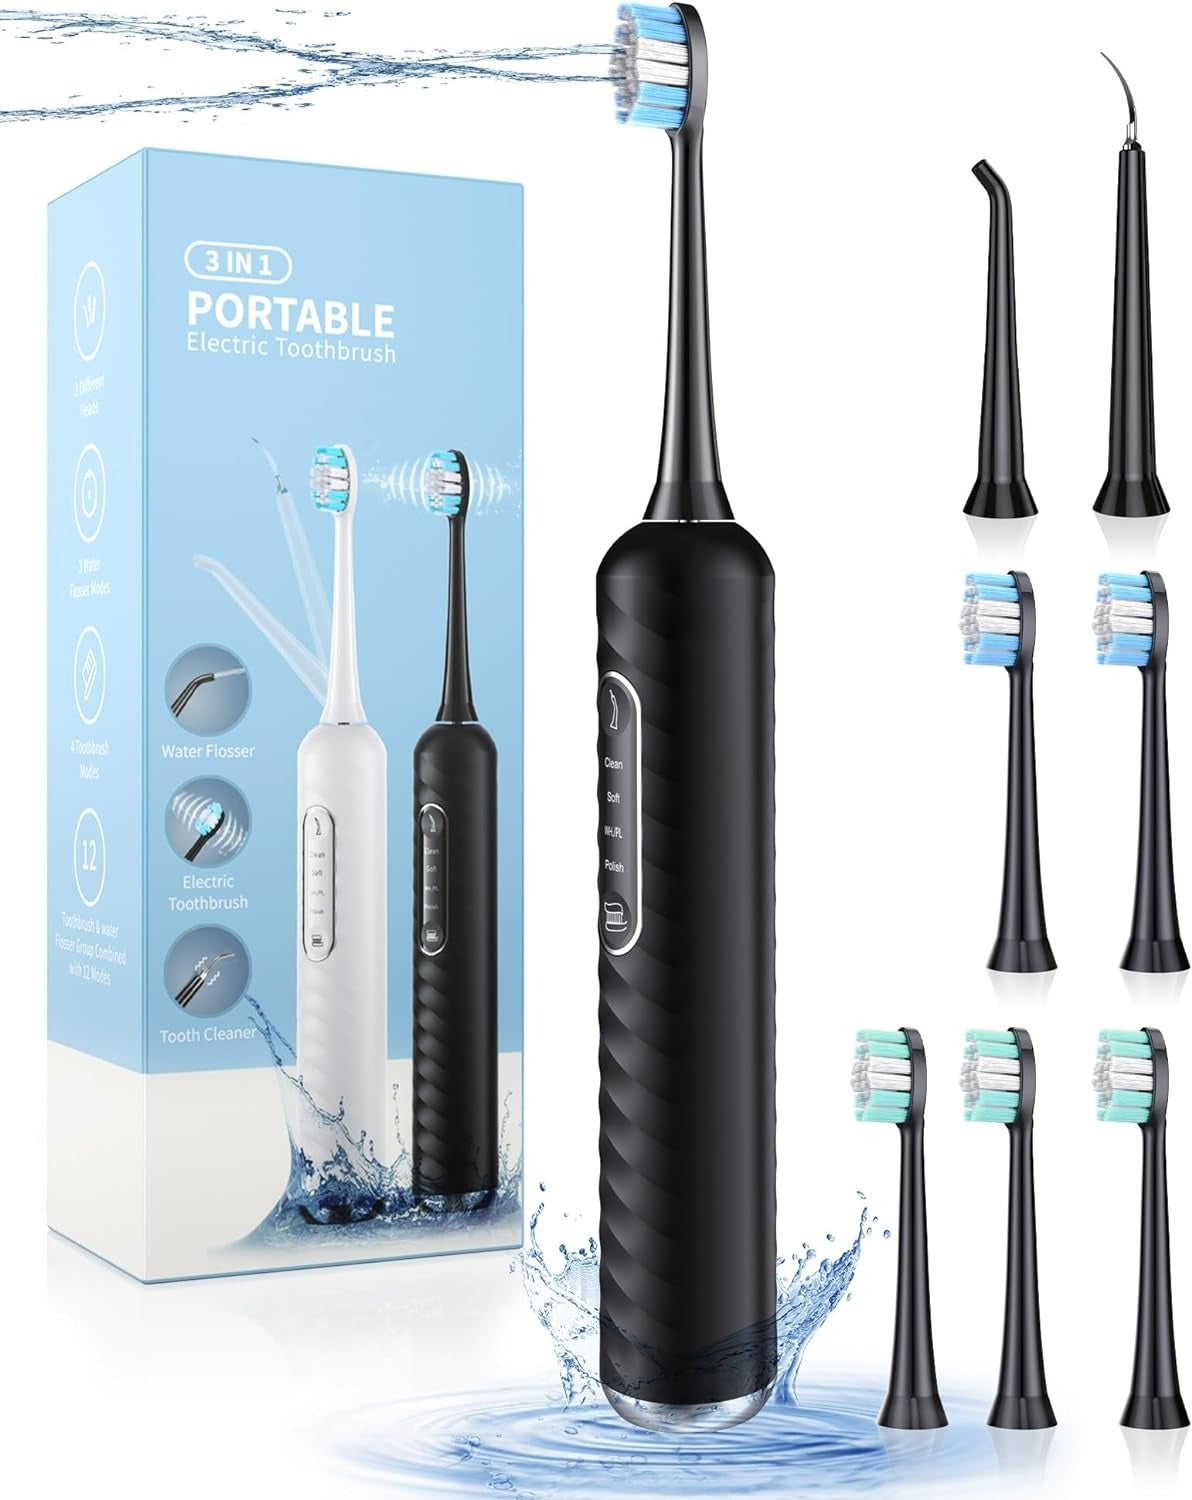 Portable Electric Toothbrush 3 in 1 Teeth Cleaning Kit With 4 Modes Electric Toothbrush and flosser Combo